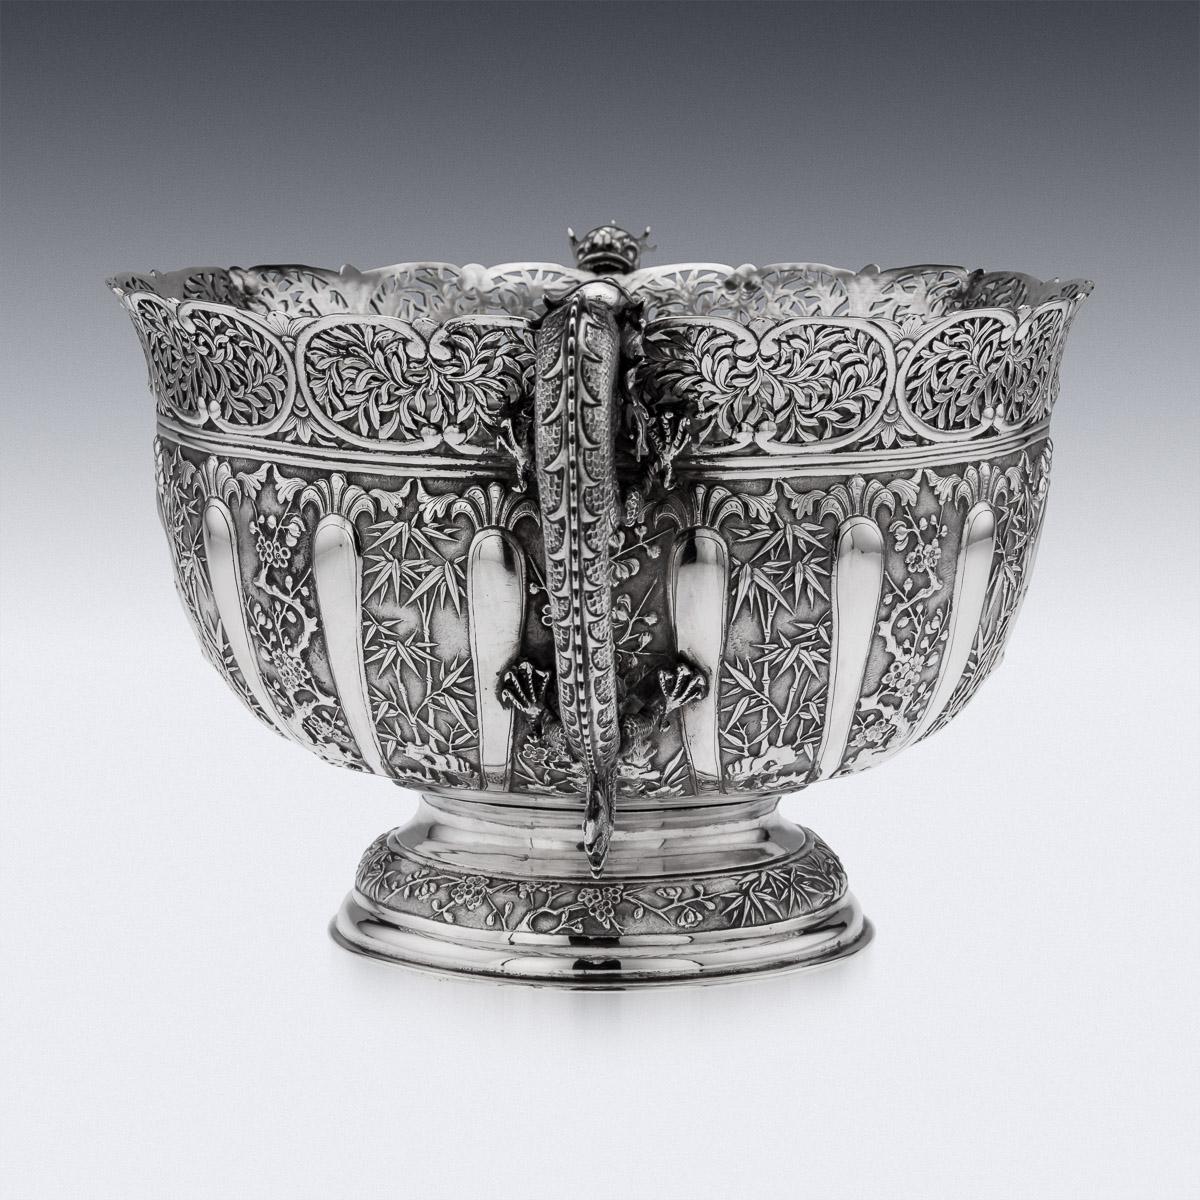 19th century Chinese silver decorative dragon bowl, of round form on a dome shaped foot. The body repoussé decorated with blooming cherry tree branches, dense bamboo and flitted bands, each side with leaf capped cartouches, one engraved with very